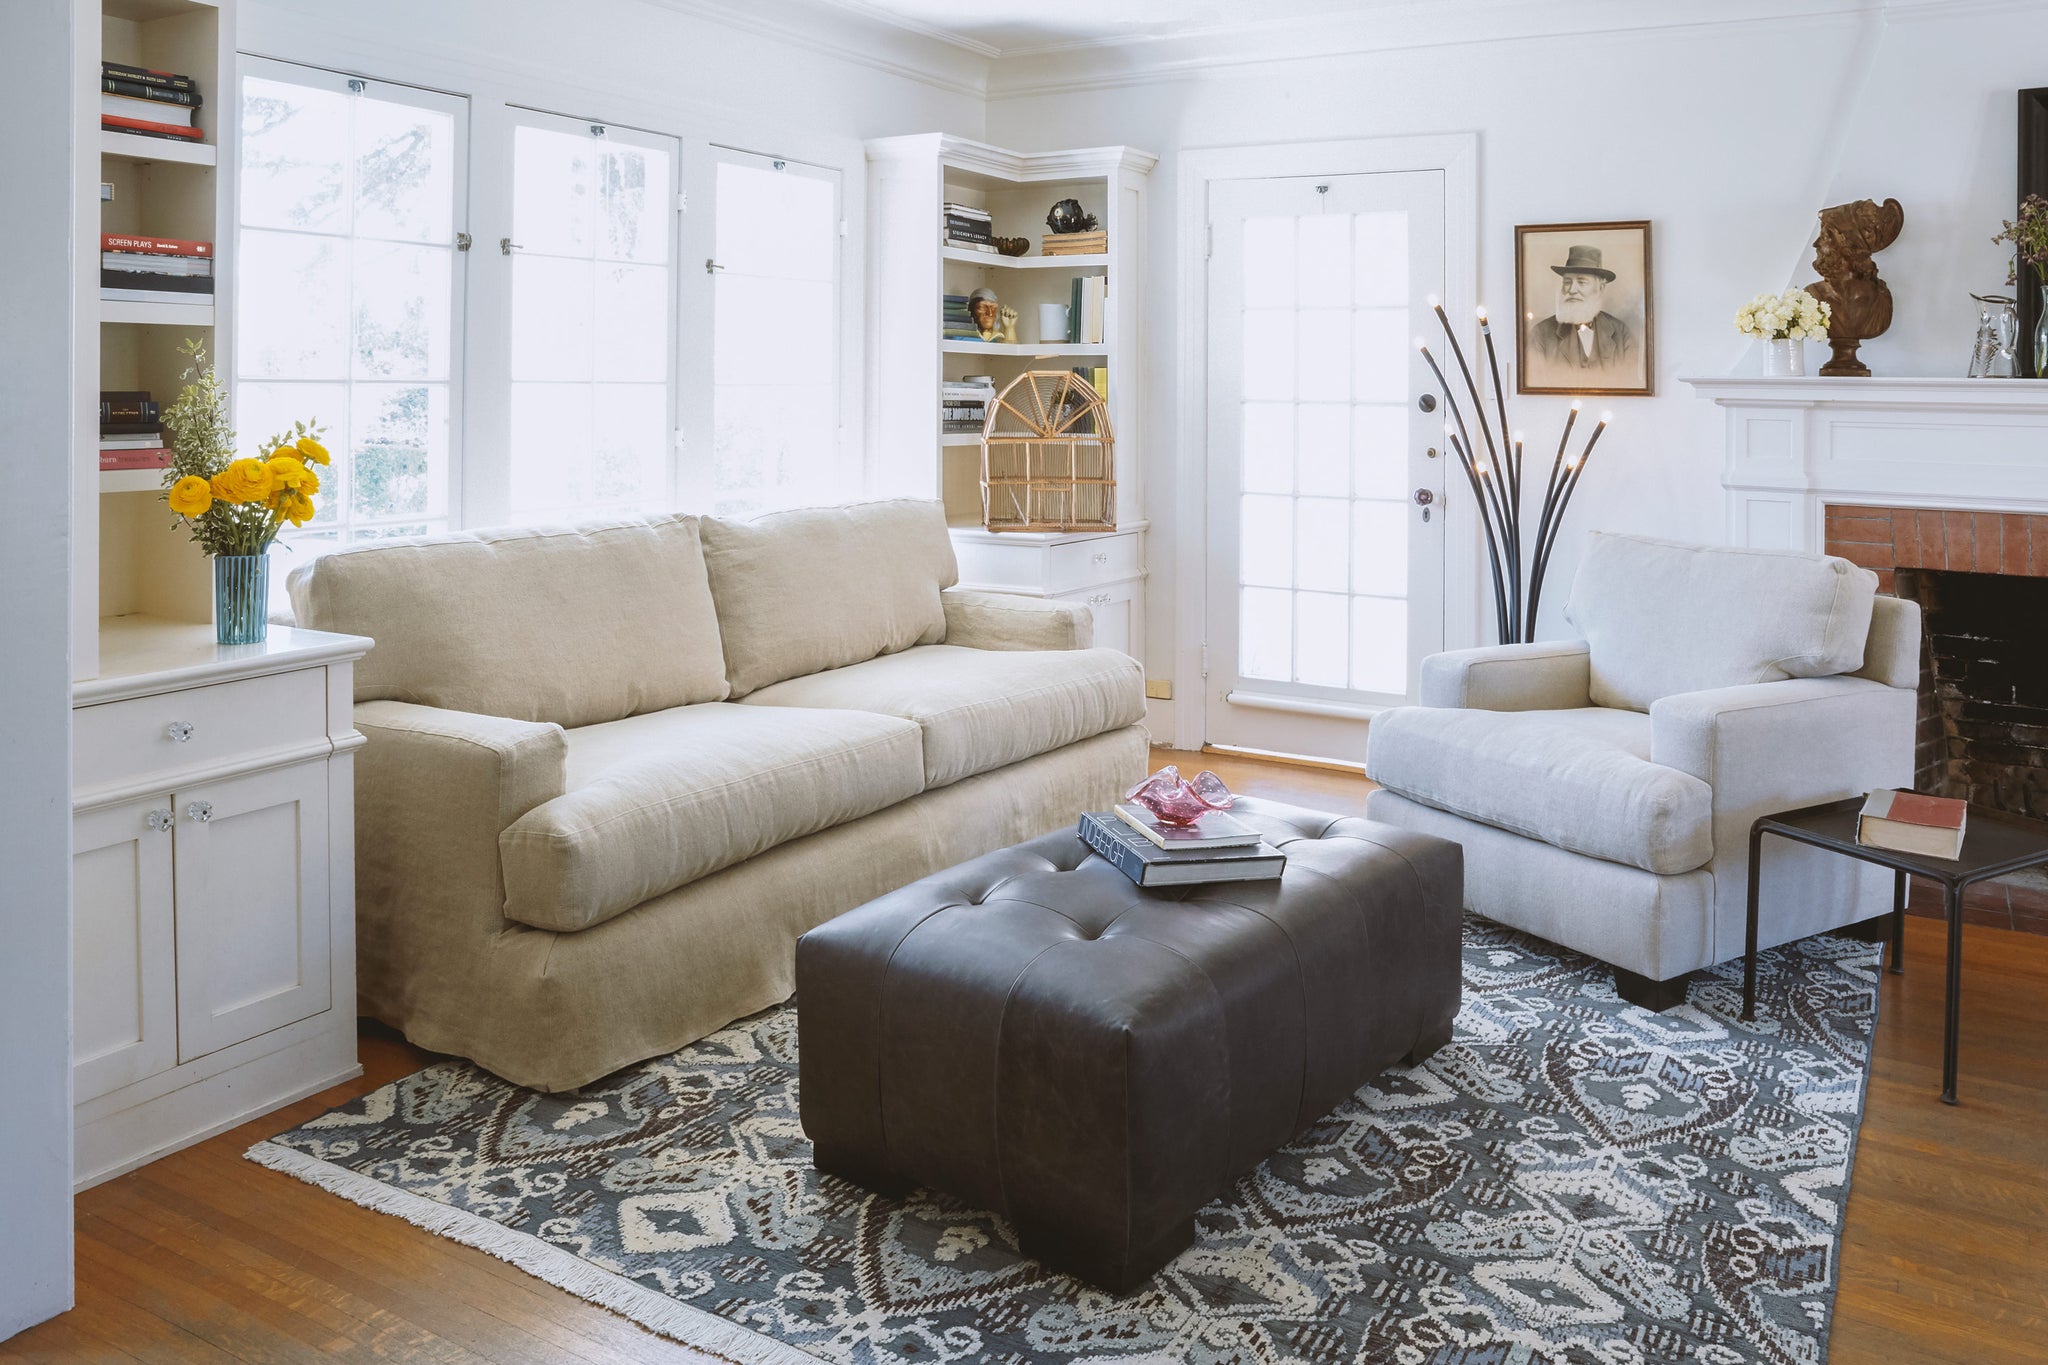  Daylight in a living room with a sofa in natural color linen in front of a window, an armchair is on the left side of the image in front of a fireplace. A dark grey leather tufted ottoman sits in the middle on a blue, grey and white rug. There are 2 bookcases on each side of the sofa. Photographed in Brevard Burlap. 